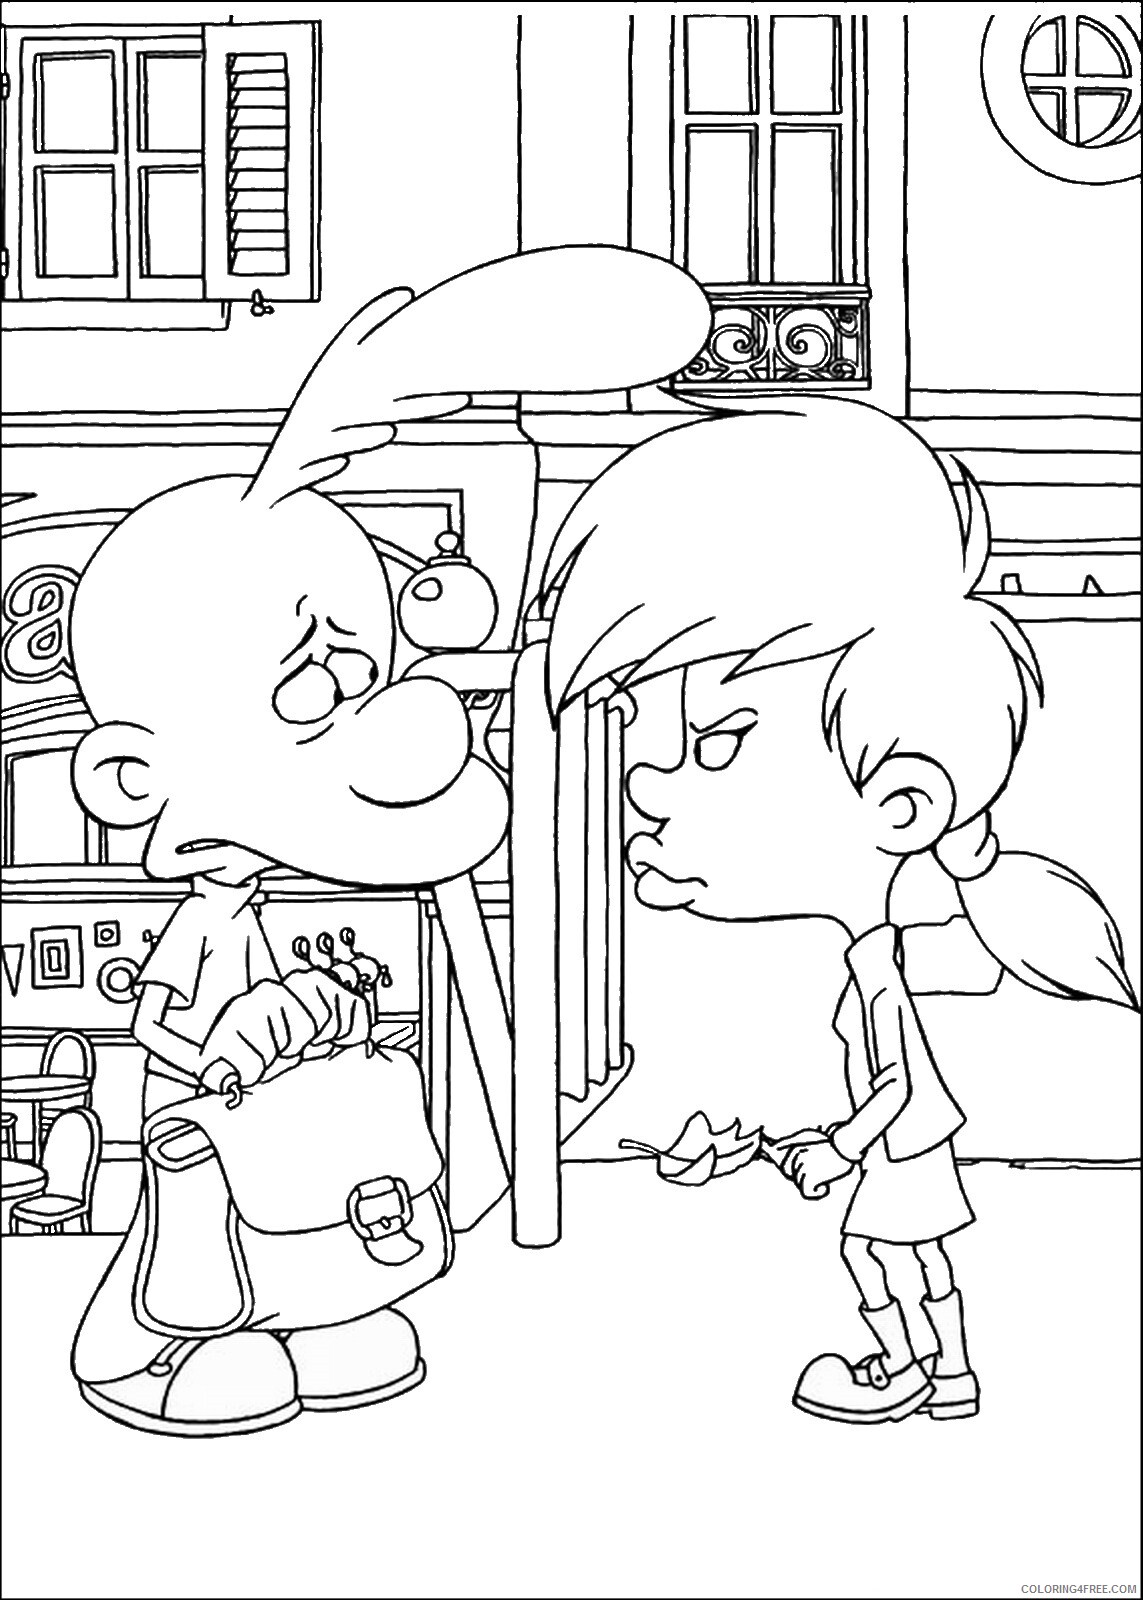 Titeuf Coloring Pages TV Film titeuf_cl_08 Printable 2020 10029 Coloring4free